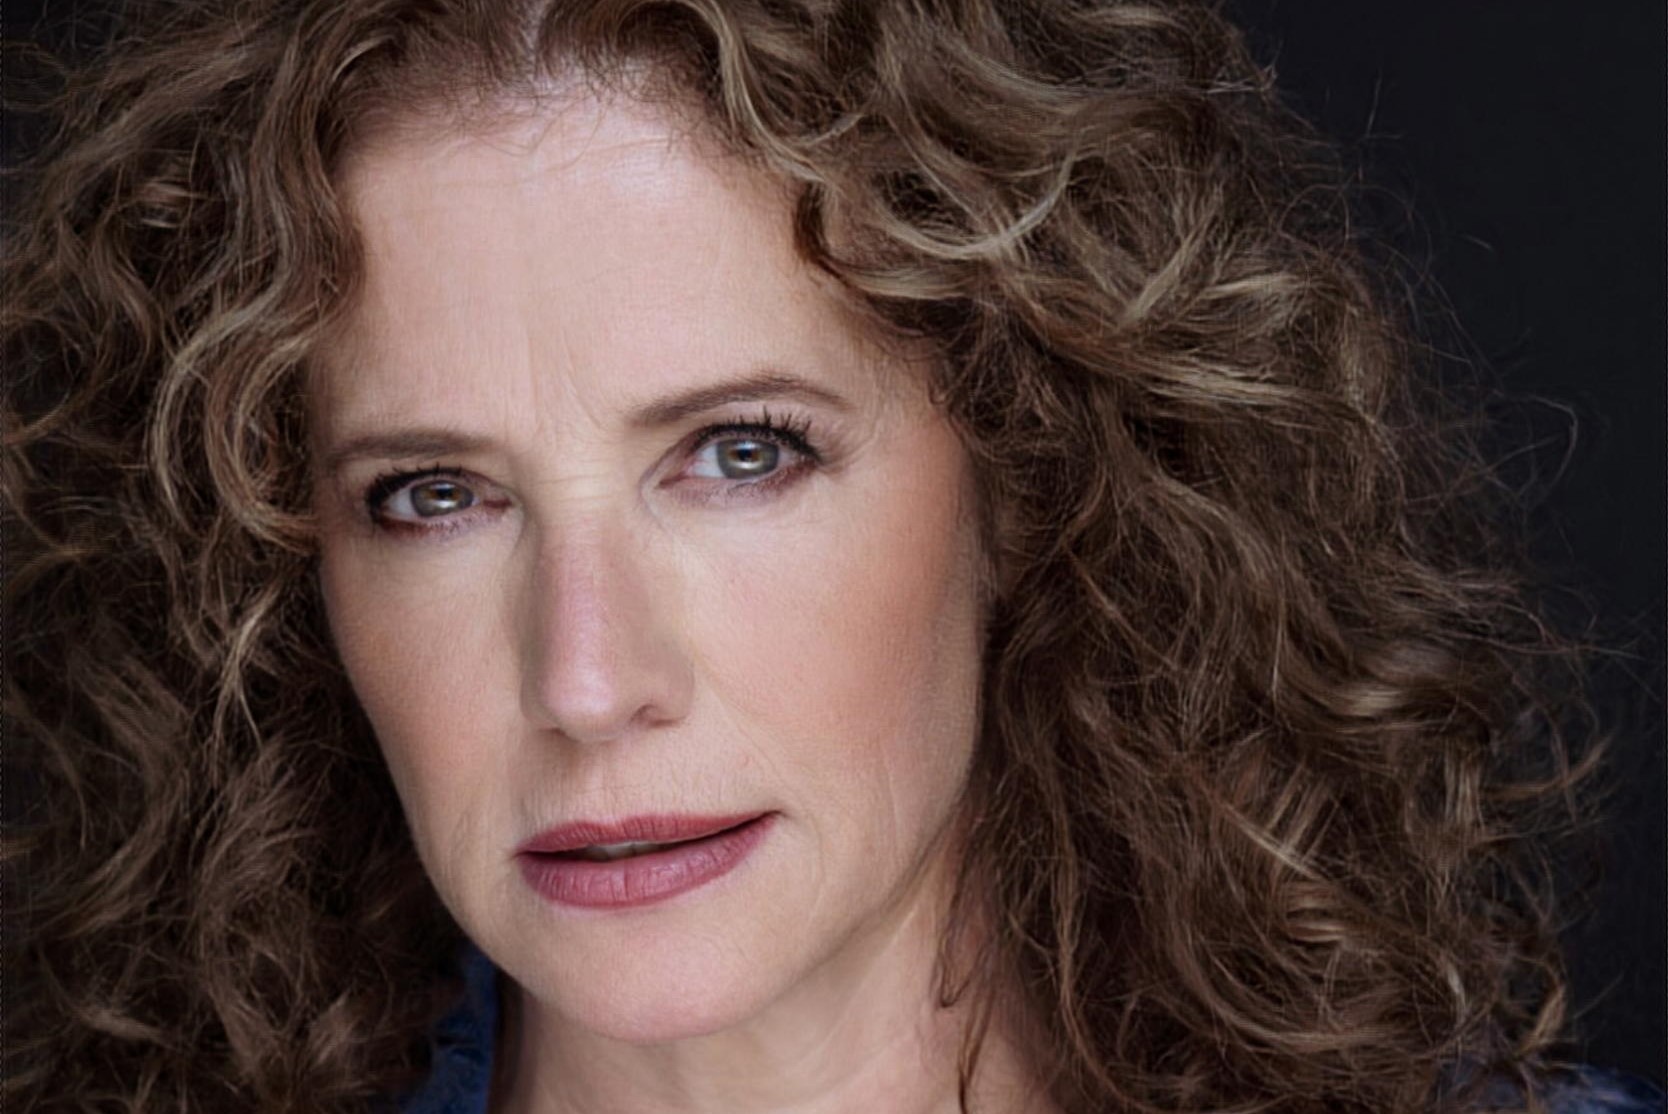 13 Astounding Facts About Nancy Travis - Facts.net